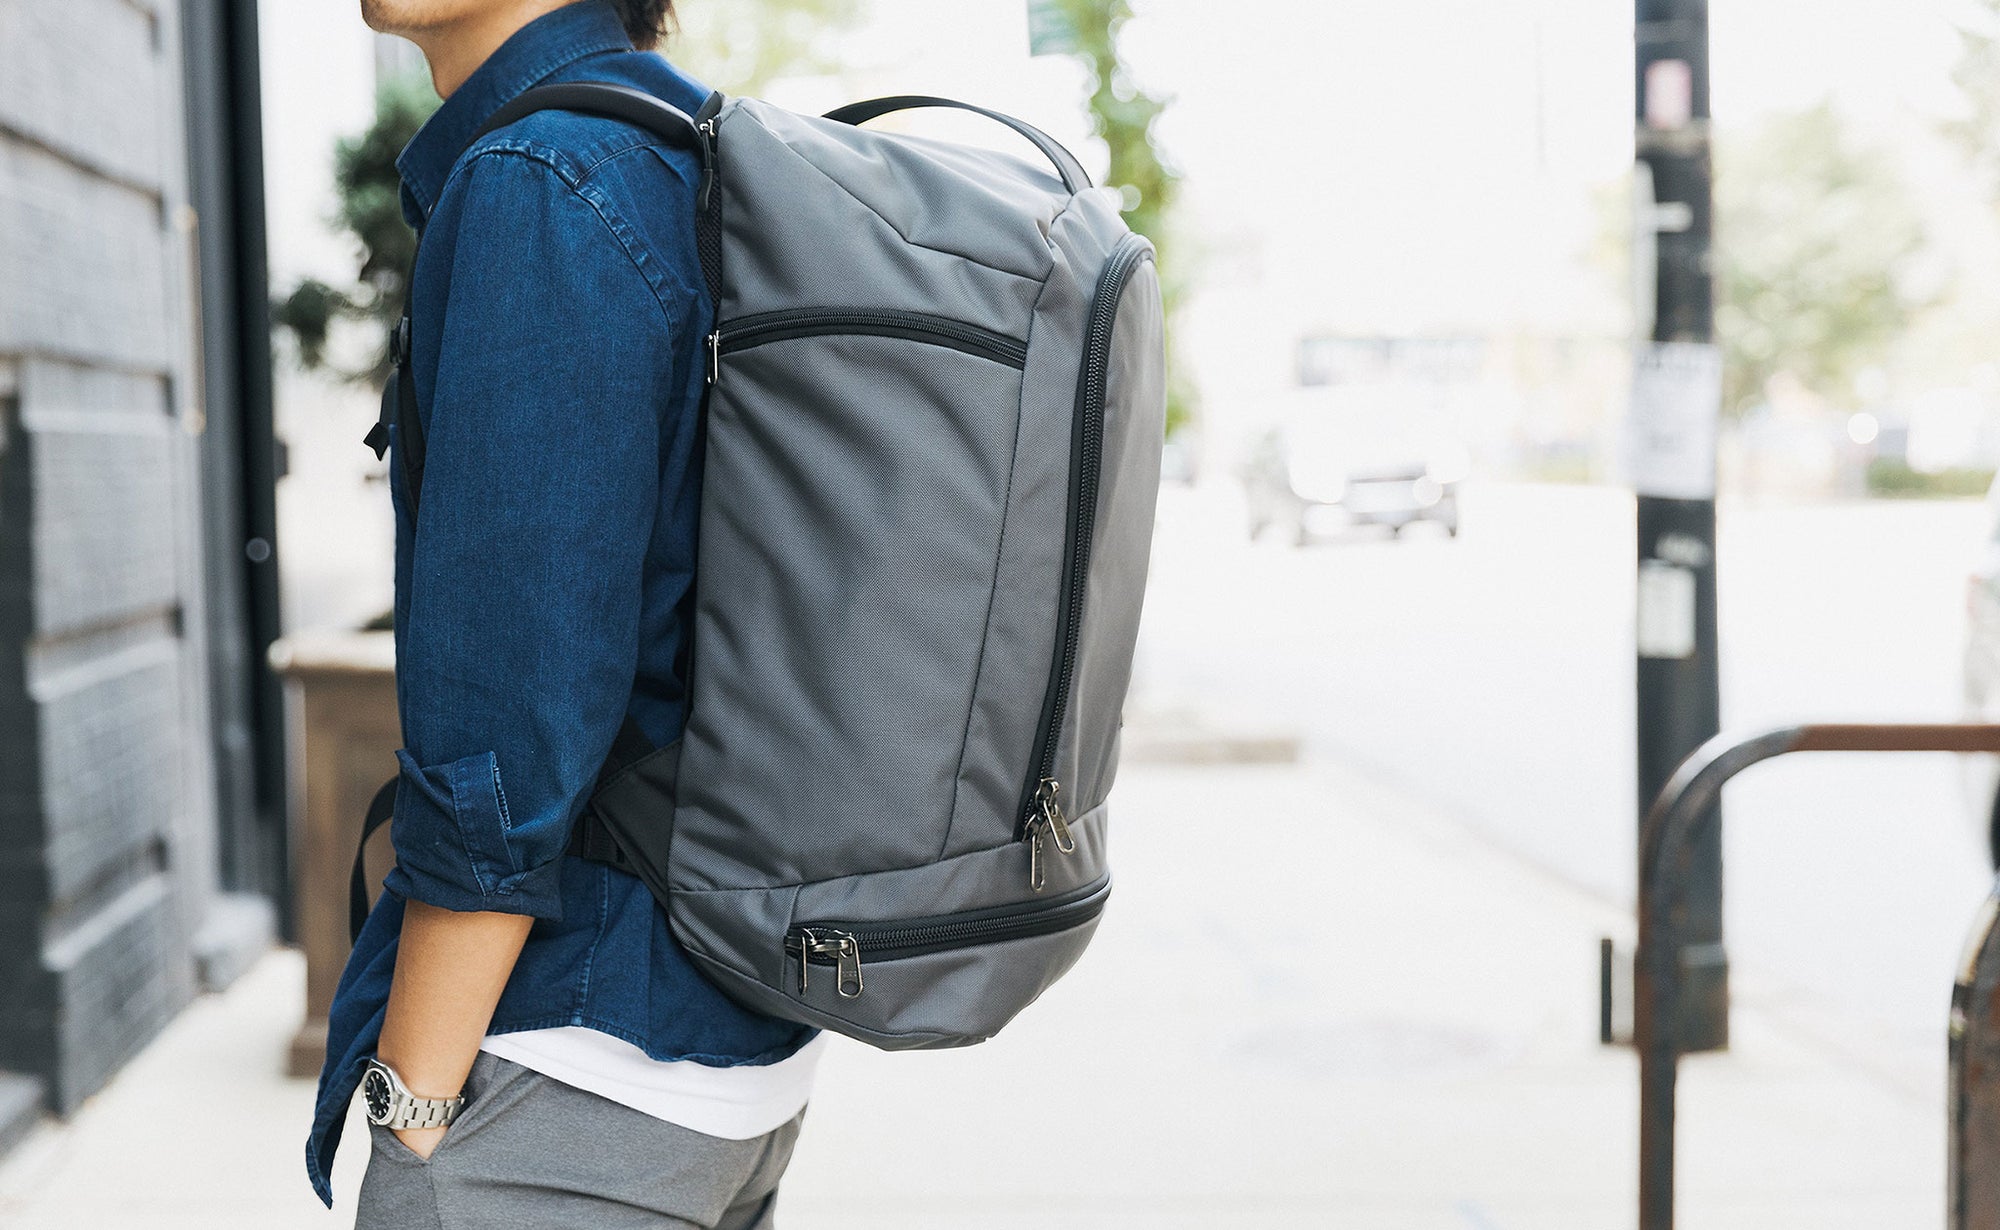 visible lifestyle^^ A side view of a person wearing the Techonaut 45 as a backpack.